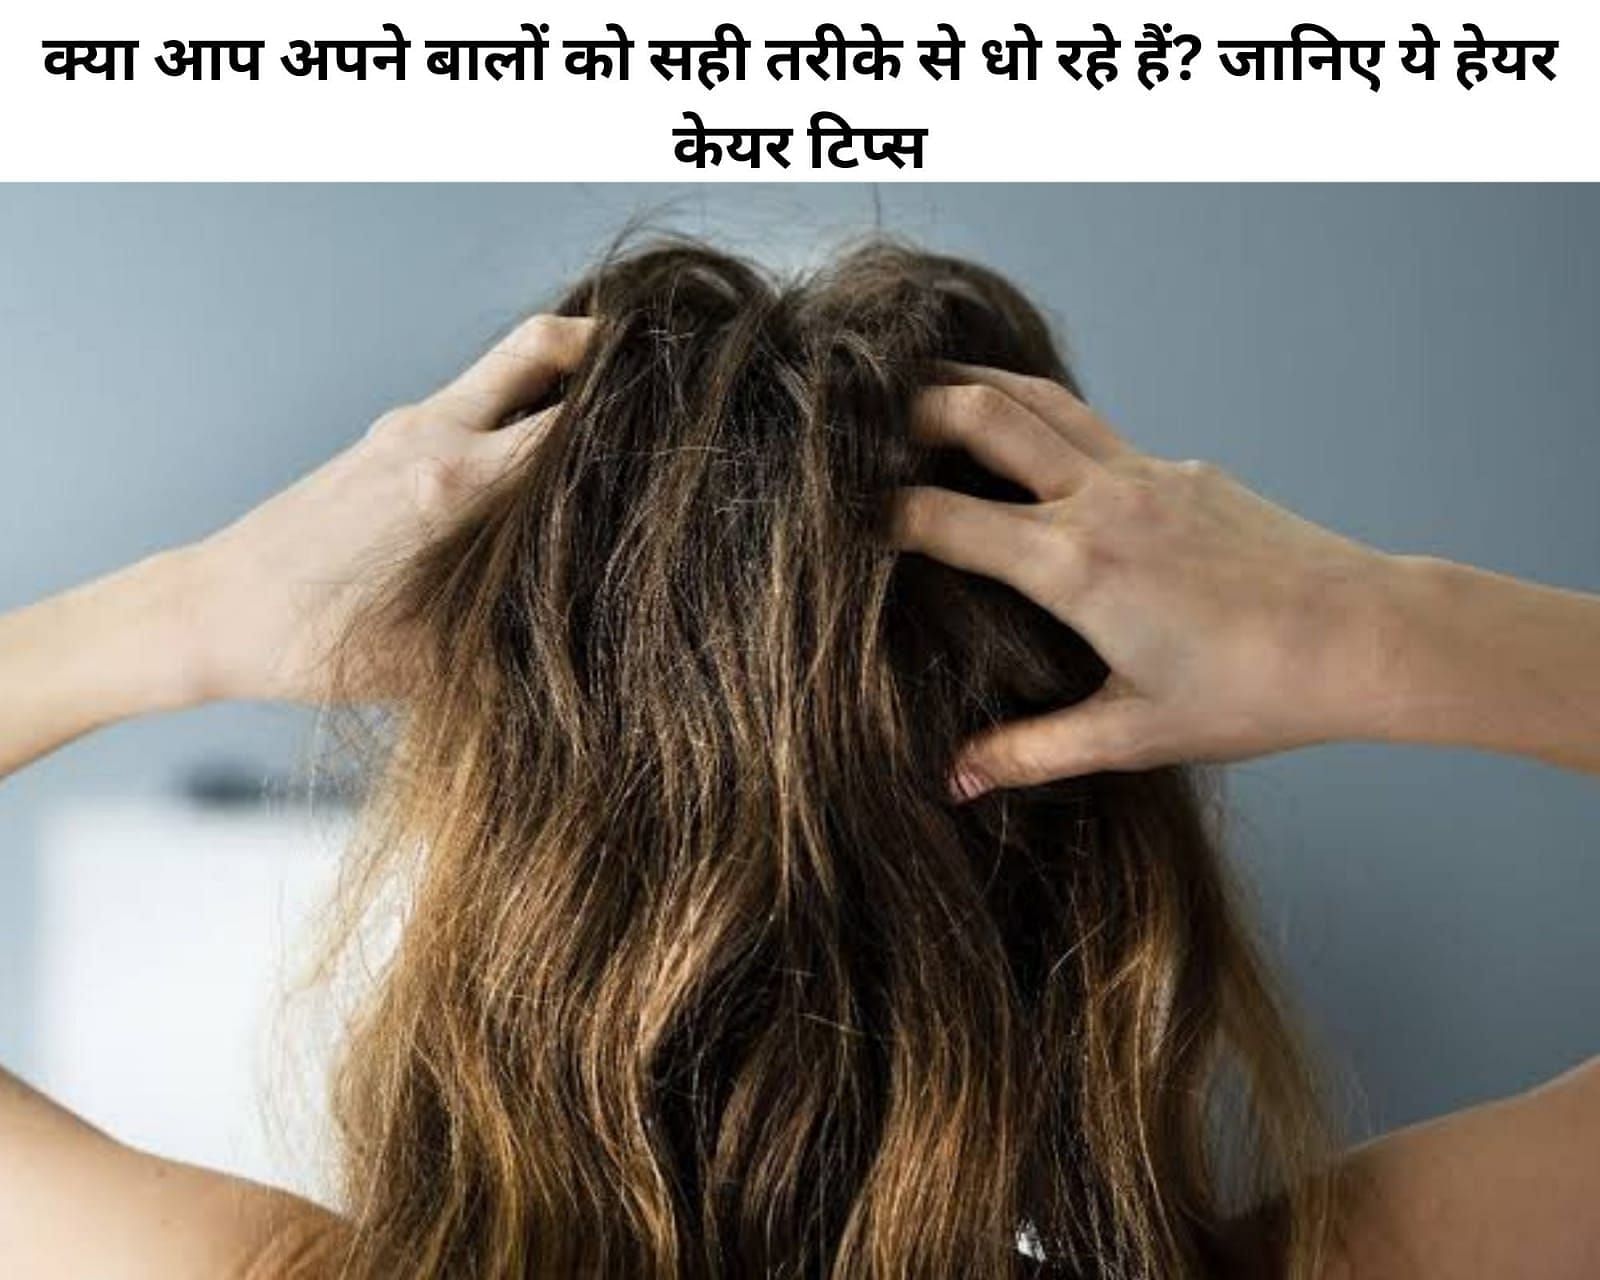 Skin Care टट बनवन क बद ऐस रख तवच क खयल नह हग कई  Infection  use this skin care method after tattoo in your bodymobile